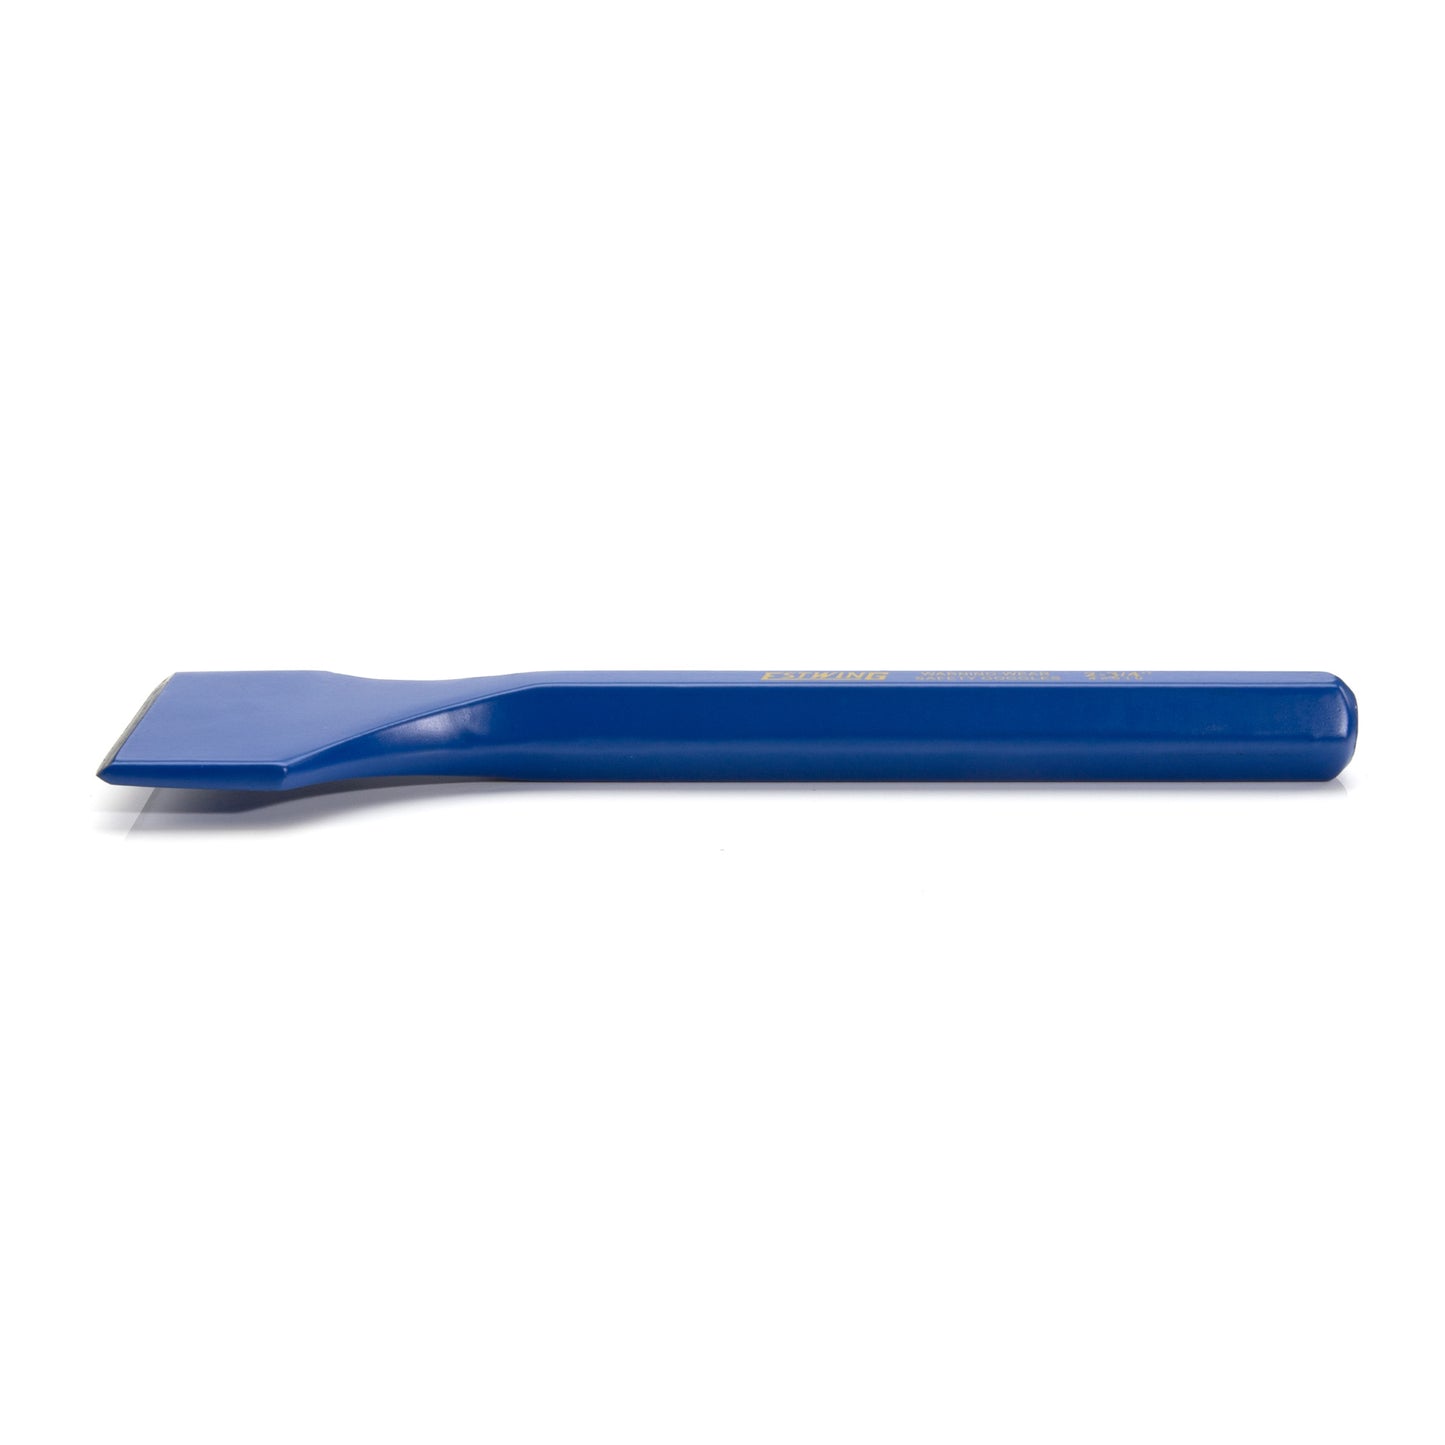 2-3/4-Inch Wide Electrician's Chisel